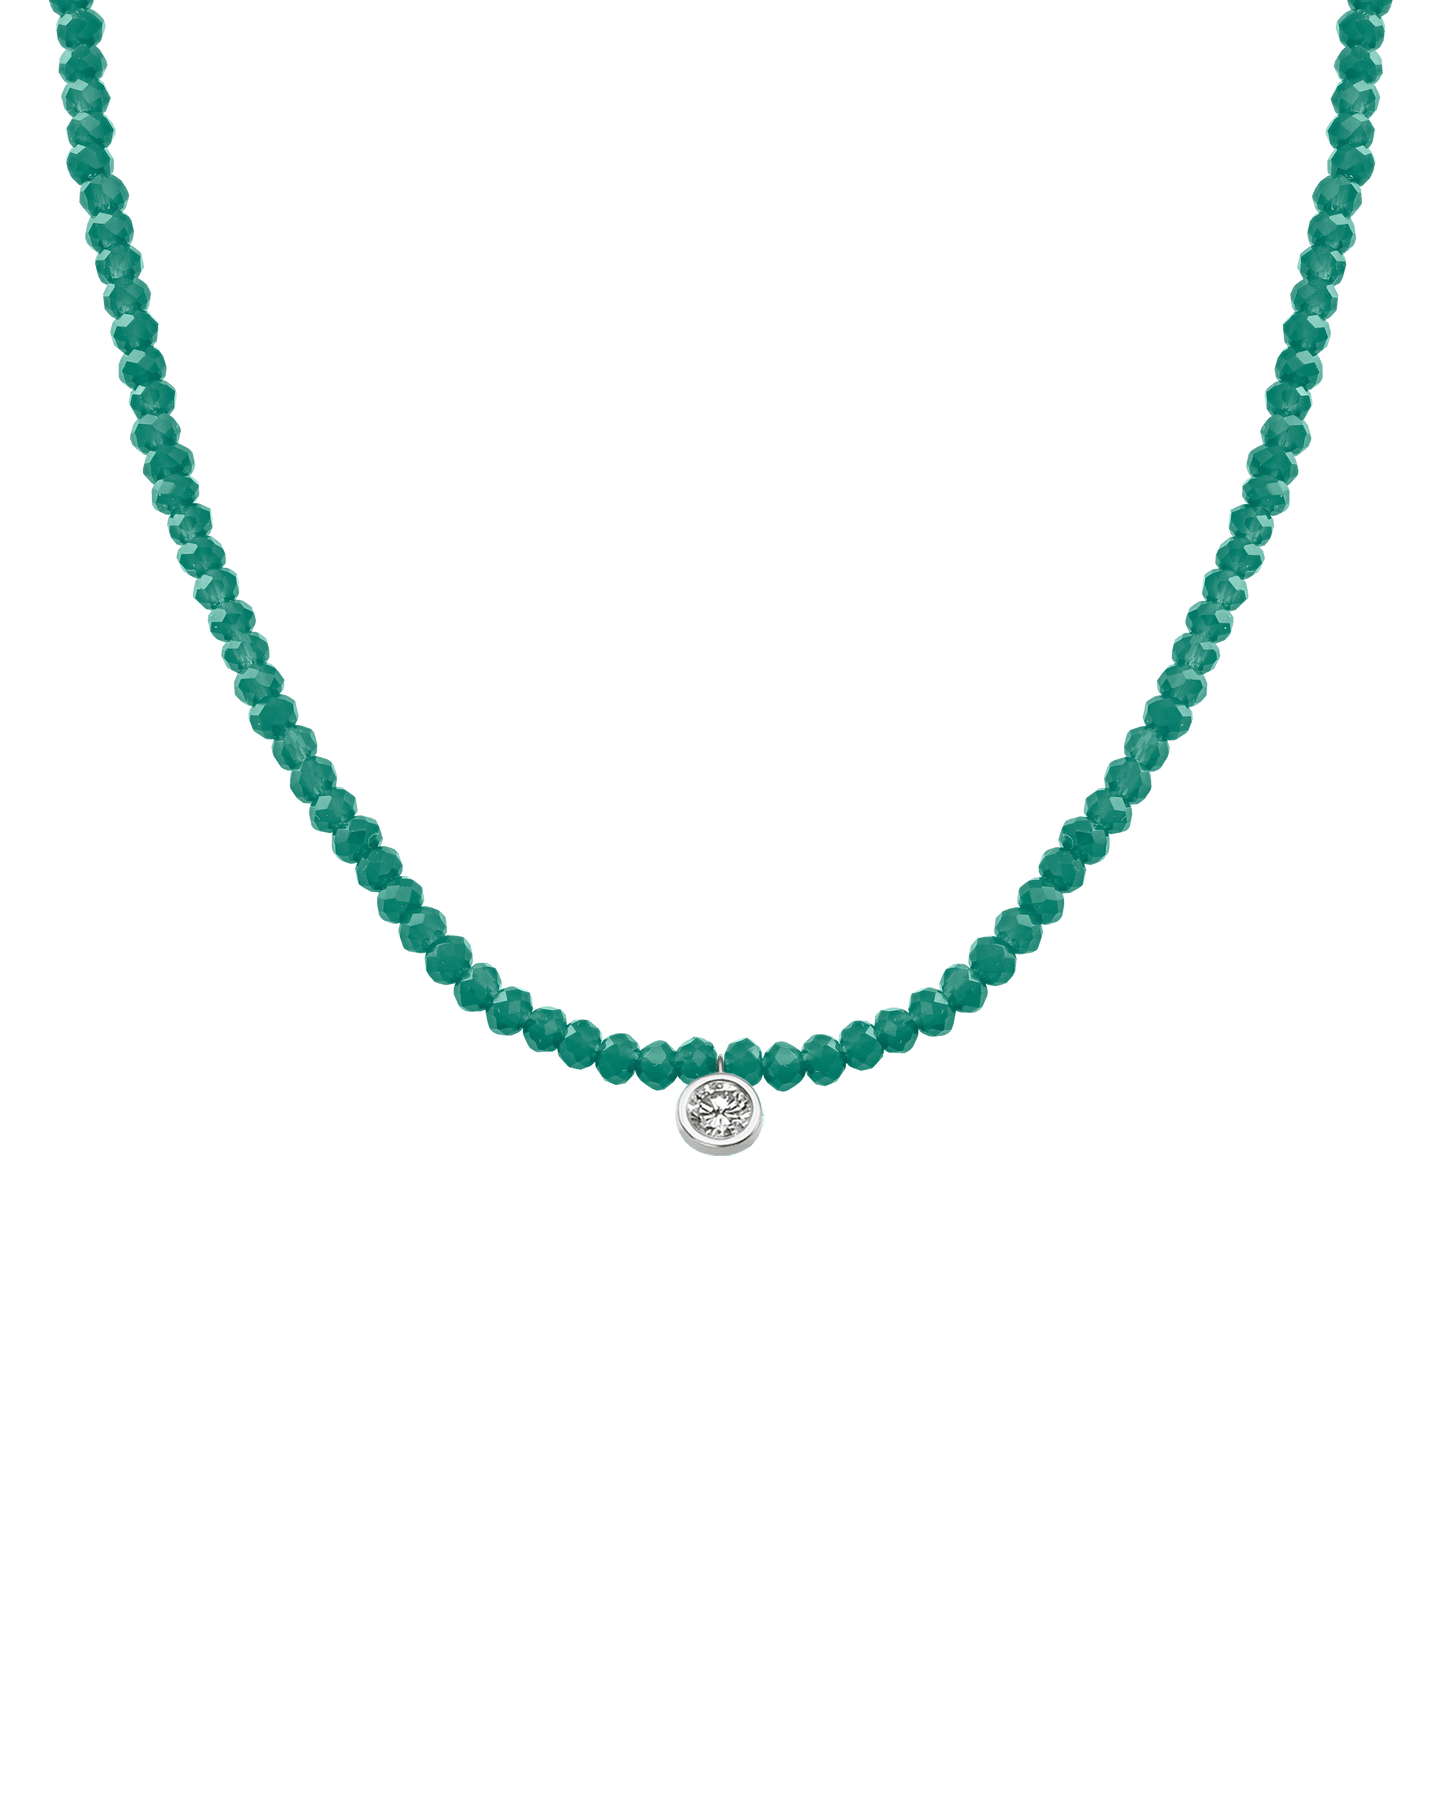 Apatite Gemstone & Diamond Necklace - 14K White Gold Necklaces 14K Solid Gold Natural Emerald Extra Large: 0.20ct 14"